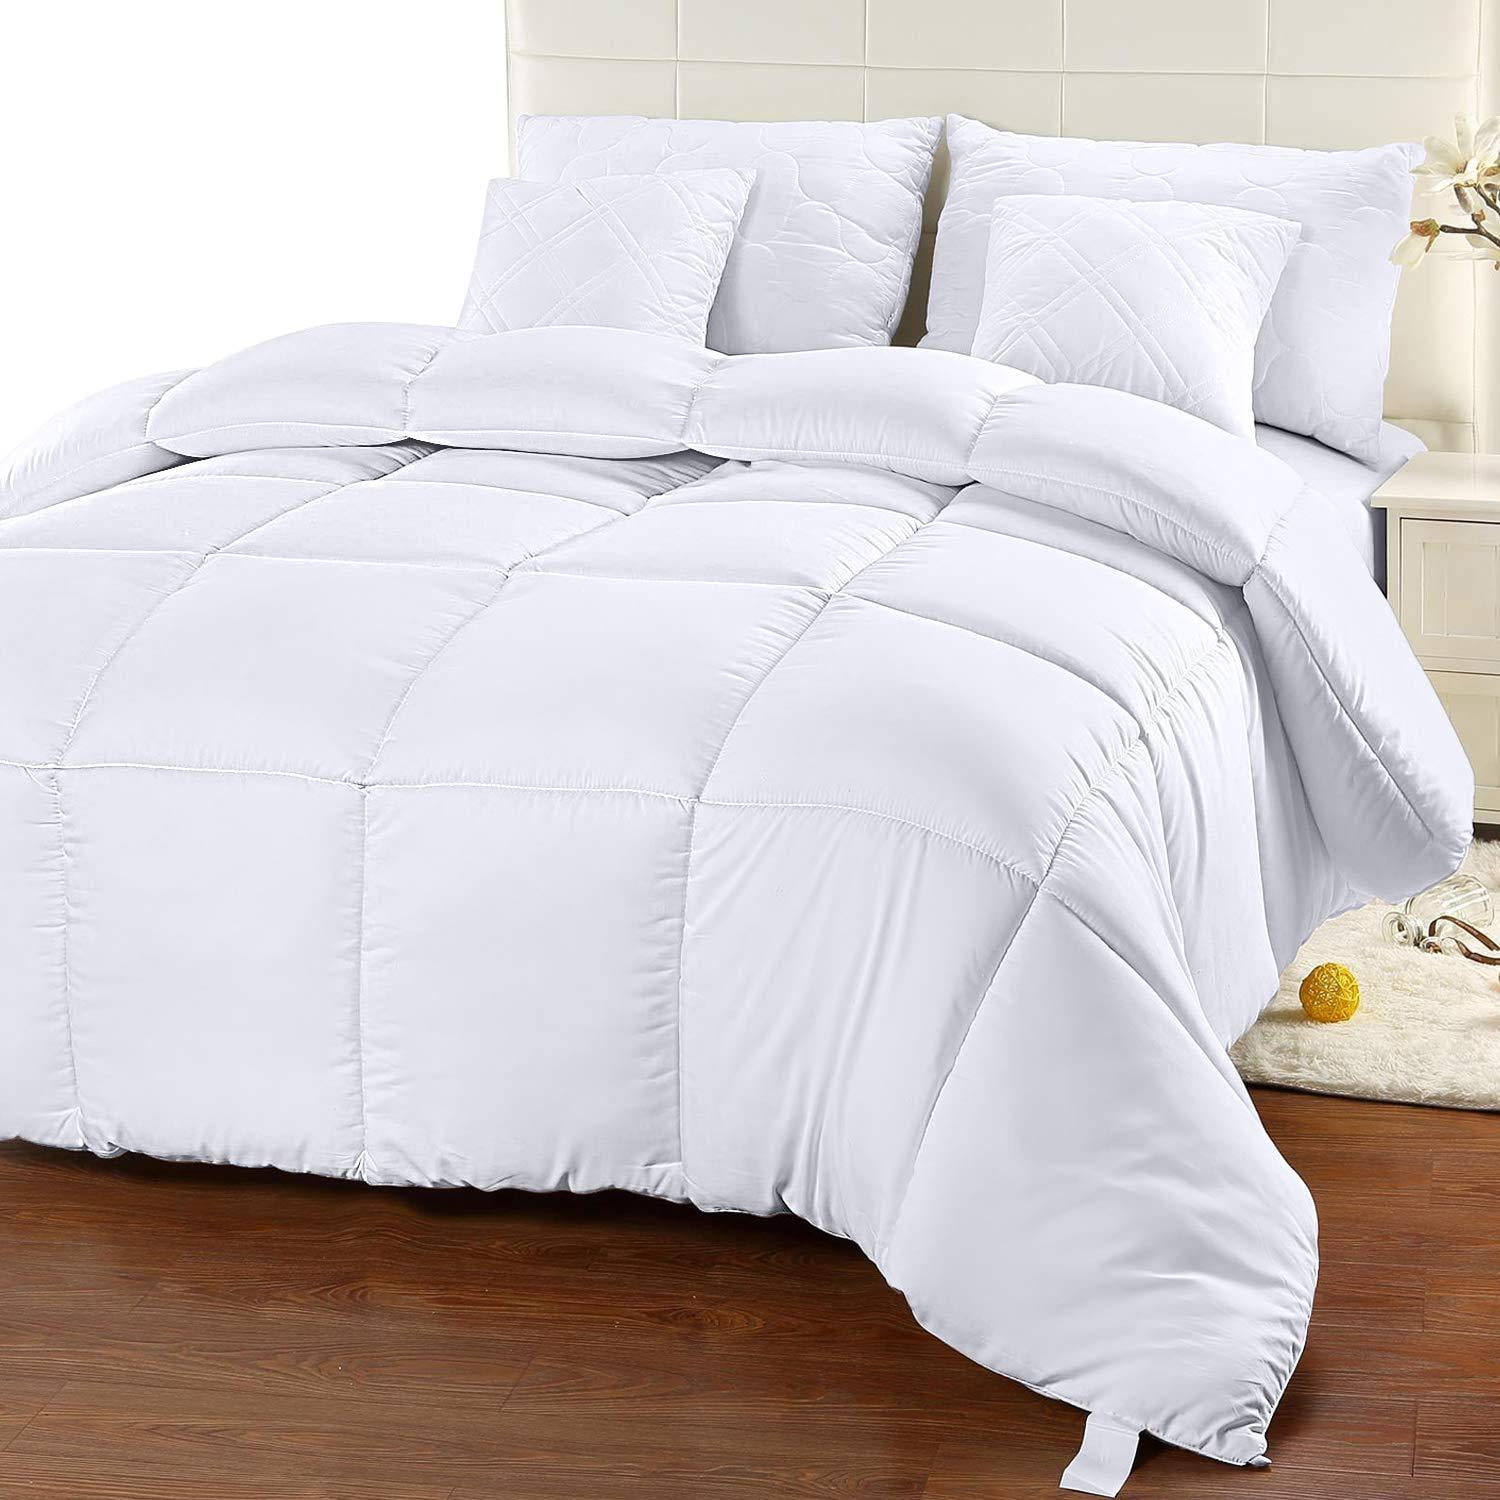 Quilted Comforter with Corner Tabs Box Stitched Down Alternative Duvet Insert